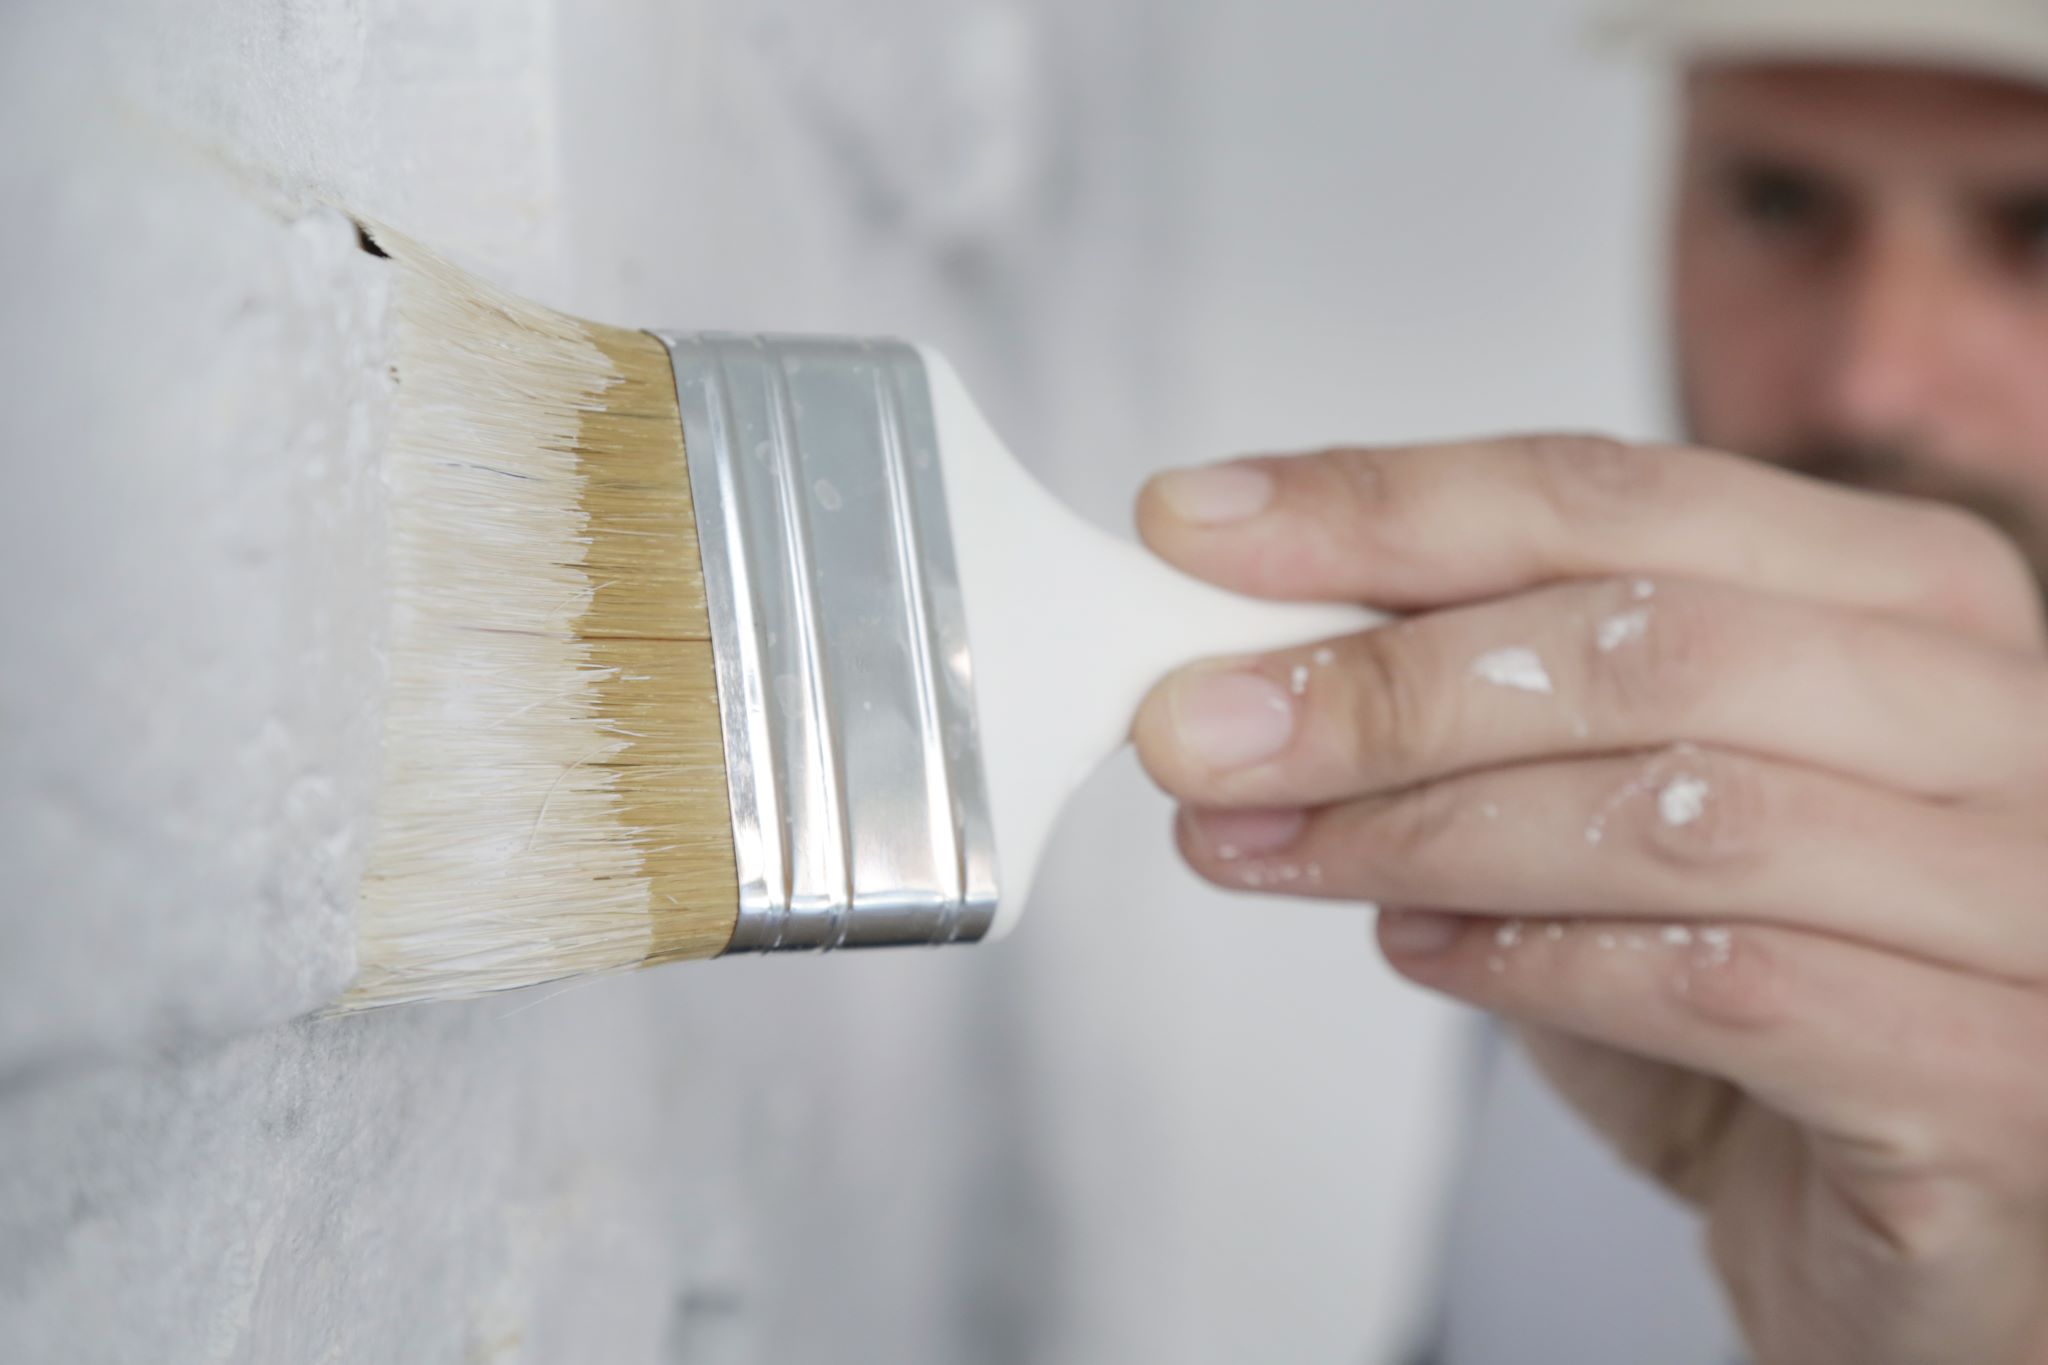 painting a white wall with a paint brush using a low VOC formula paint